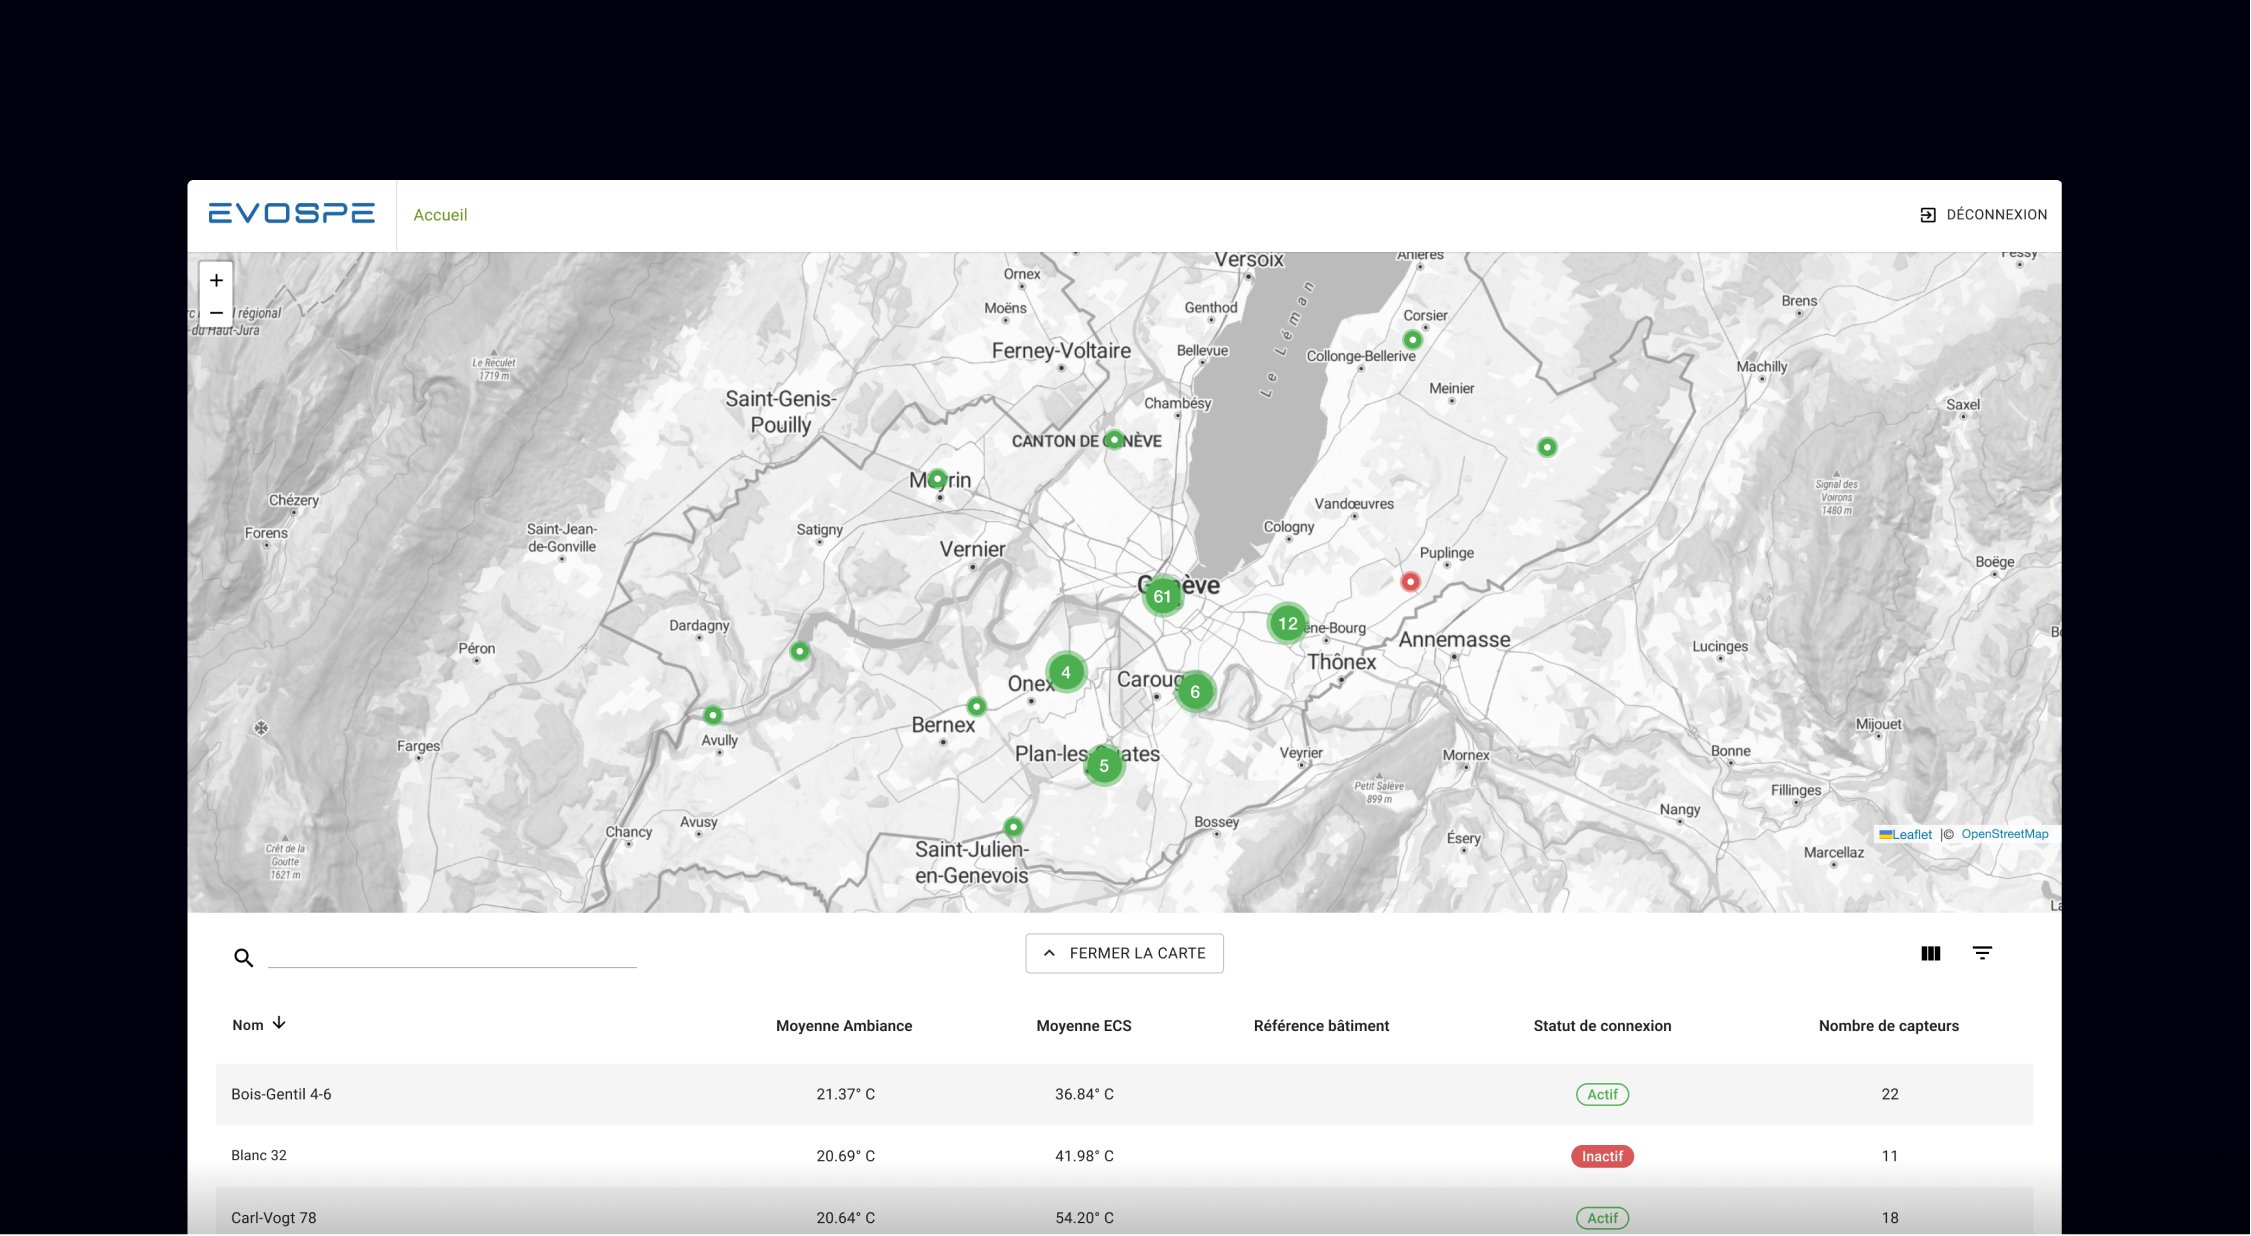 Evospe is a set of applications and data standardization systems allowing a visual reading of the energy status of building lots